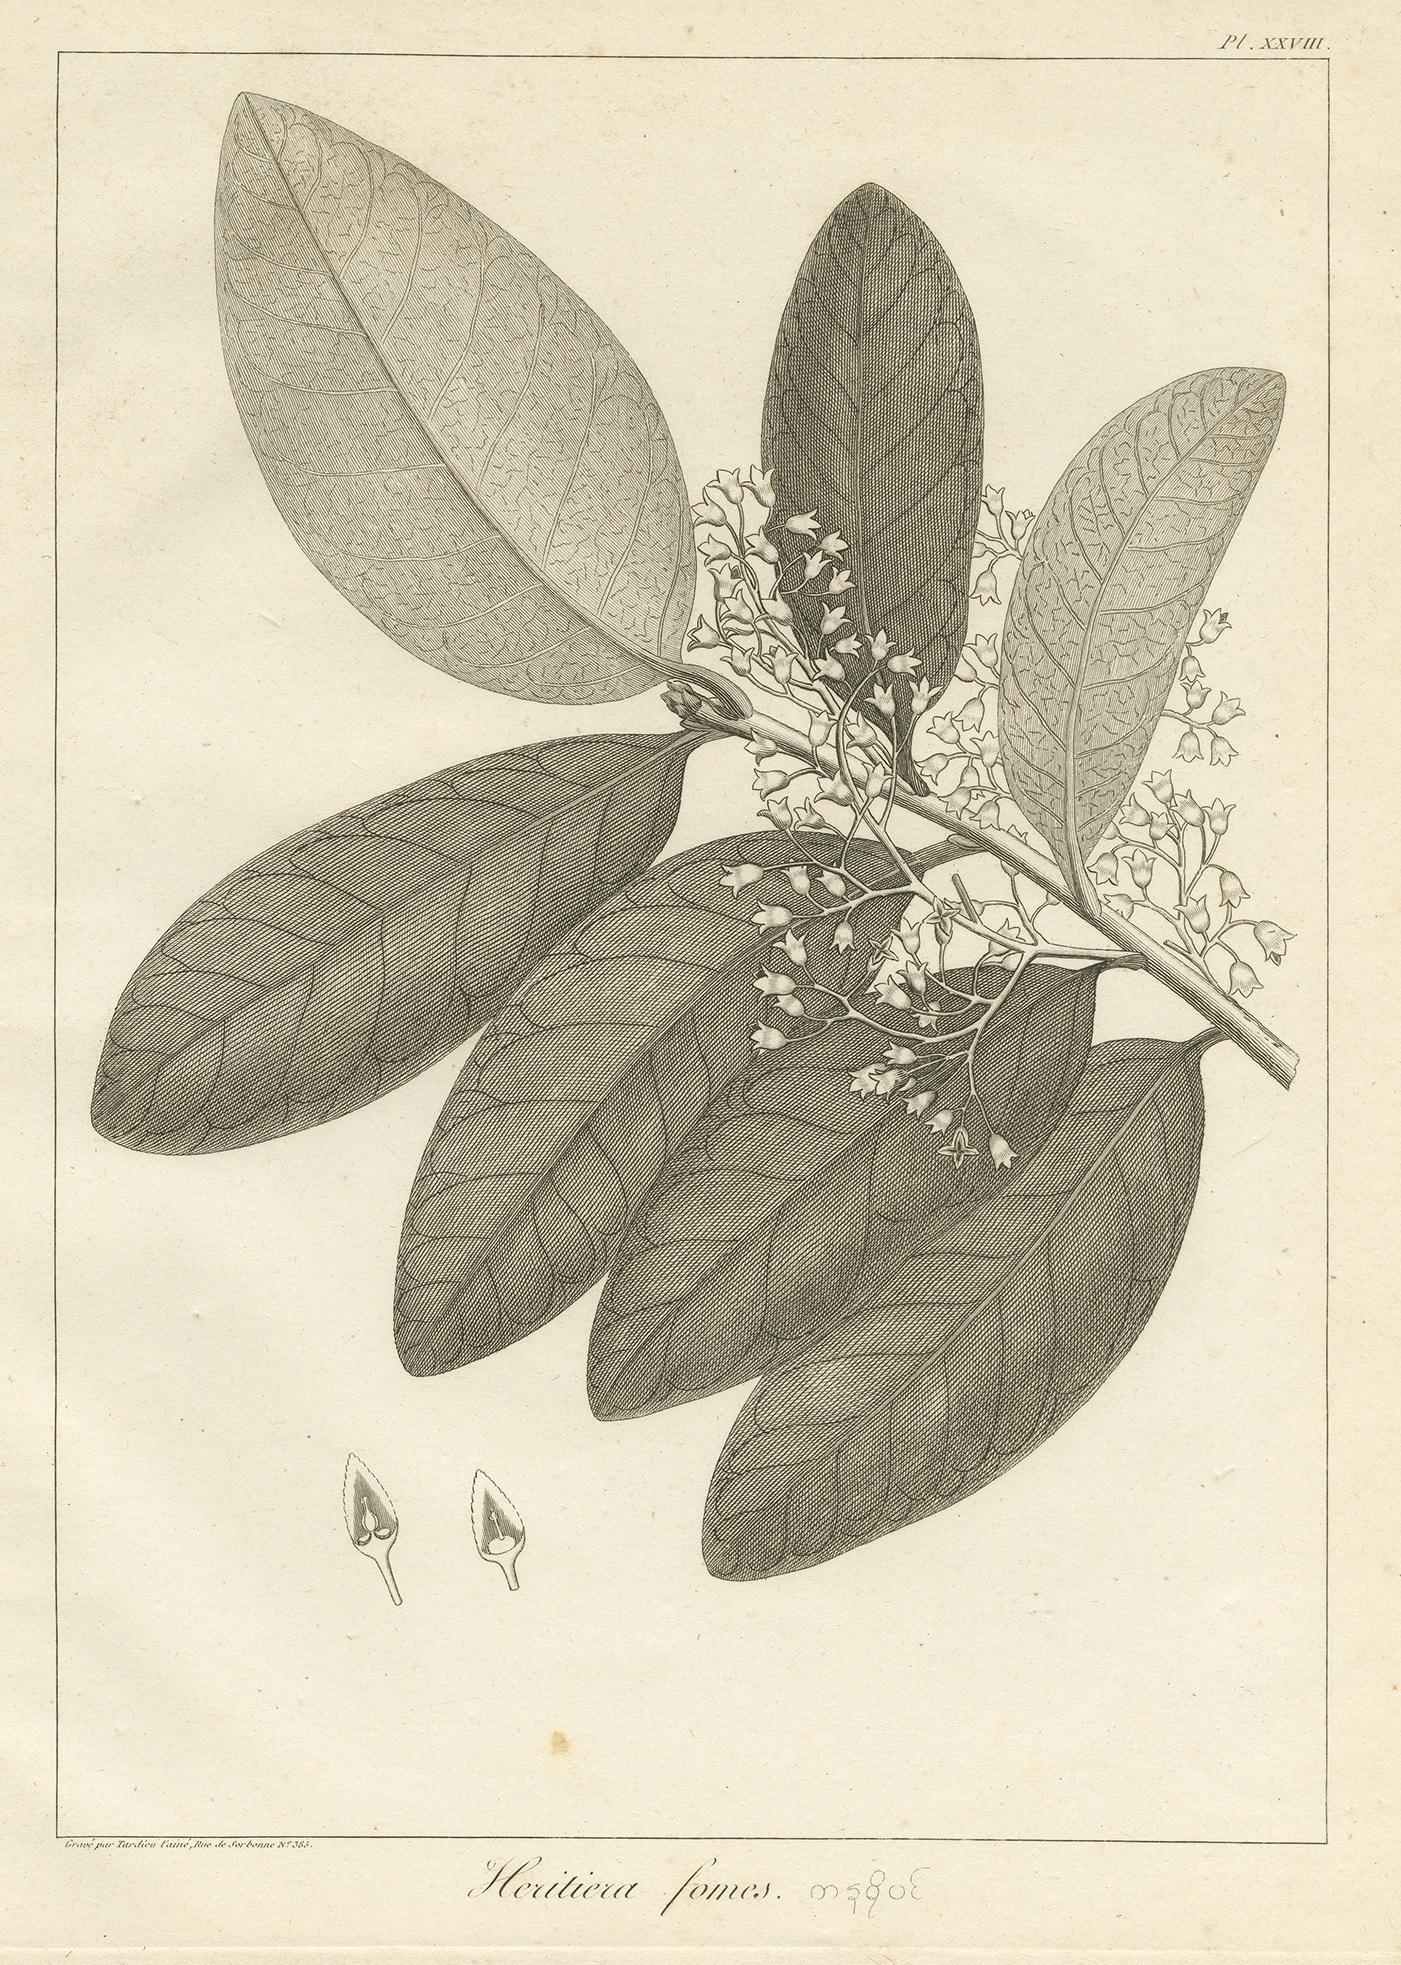 19th Century Antique Print of the Heritiera Fomes Mangrove Tree by Symes, 1800 For Sale